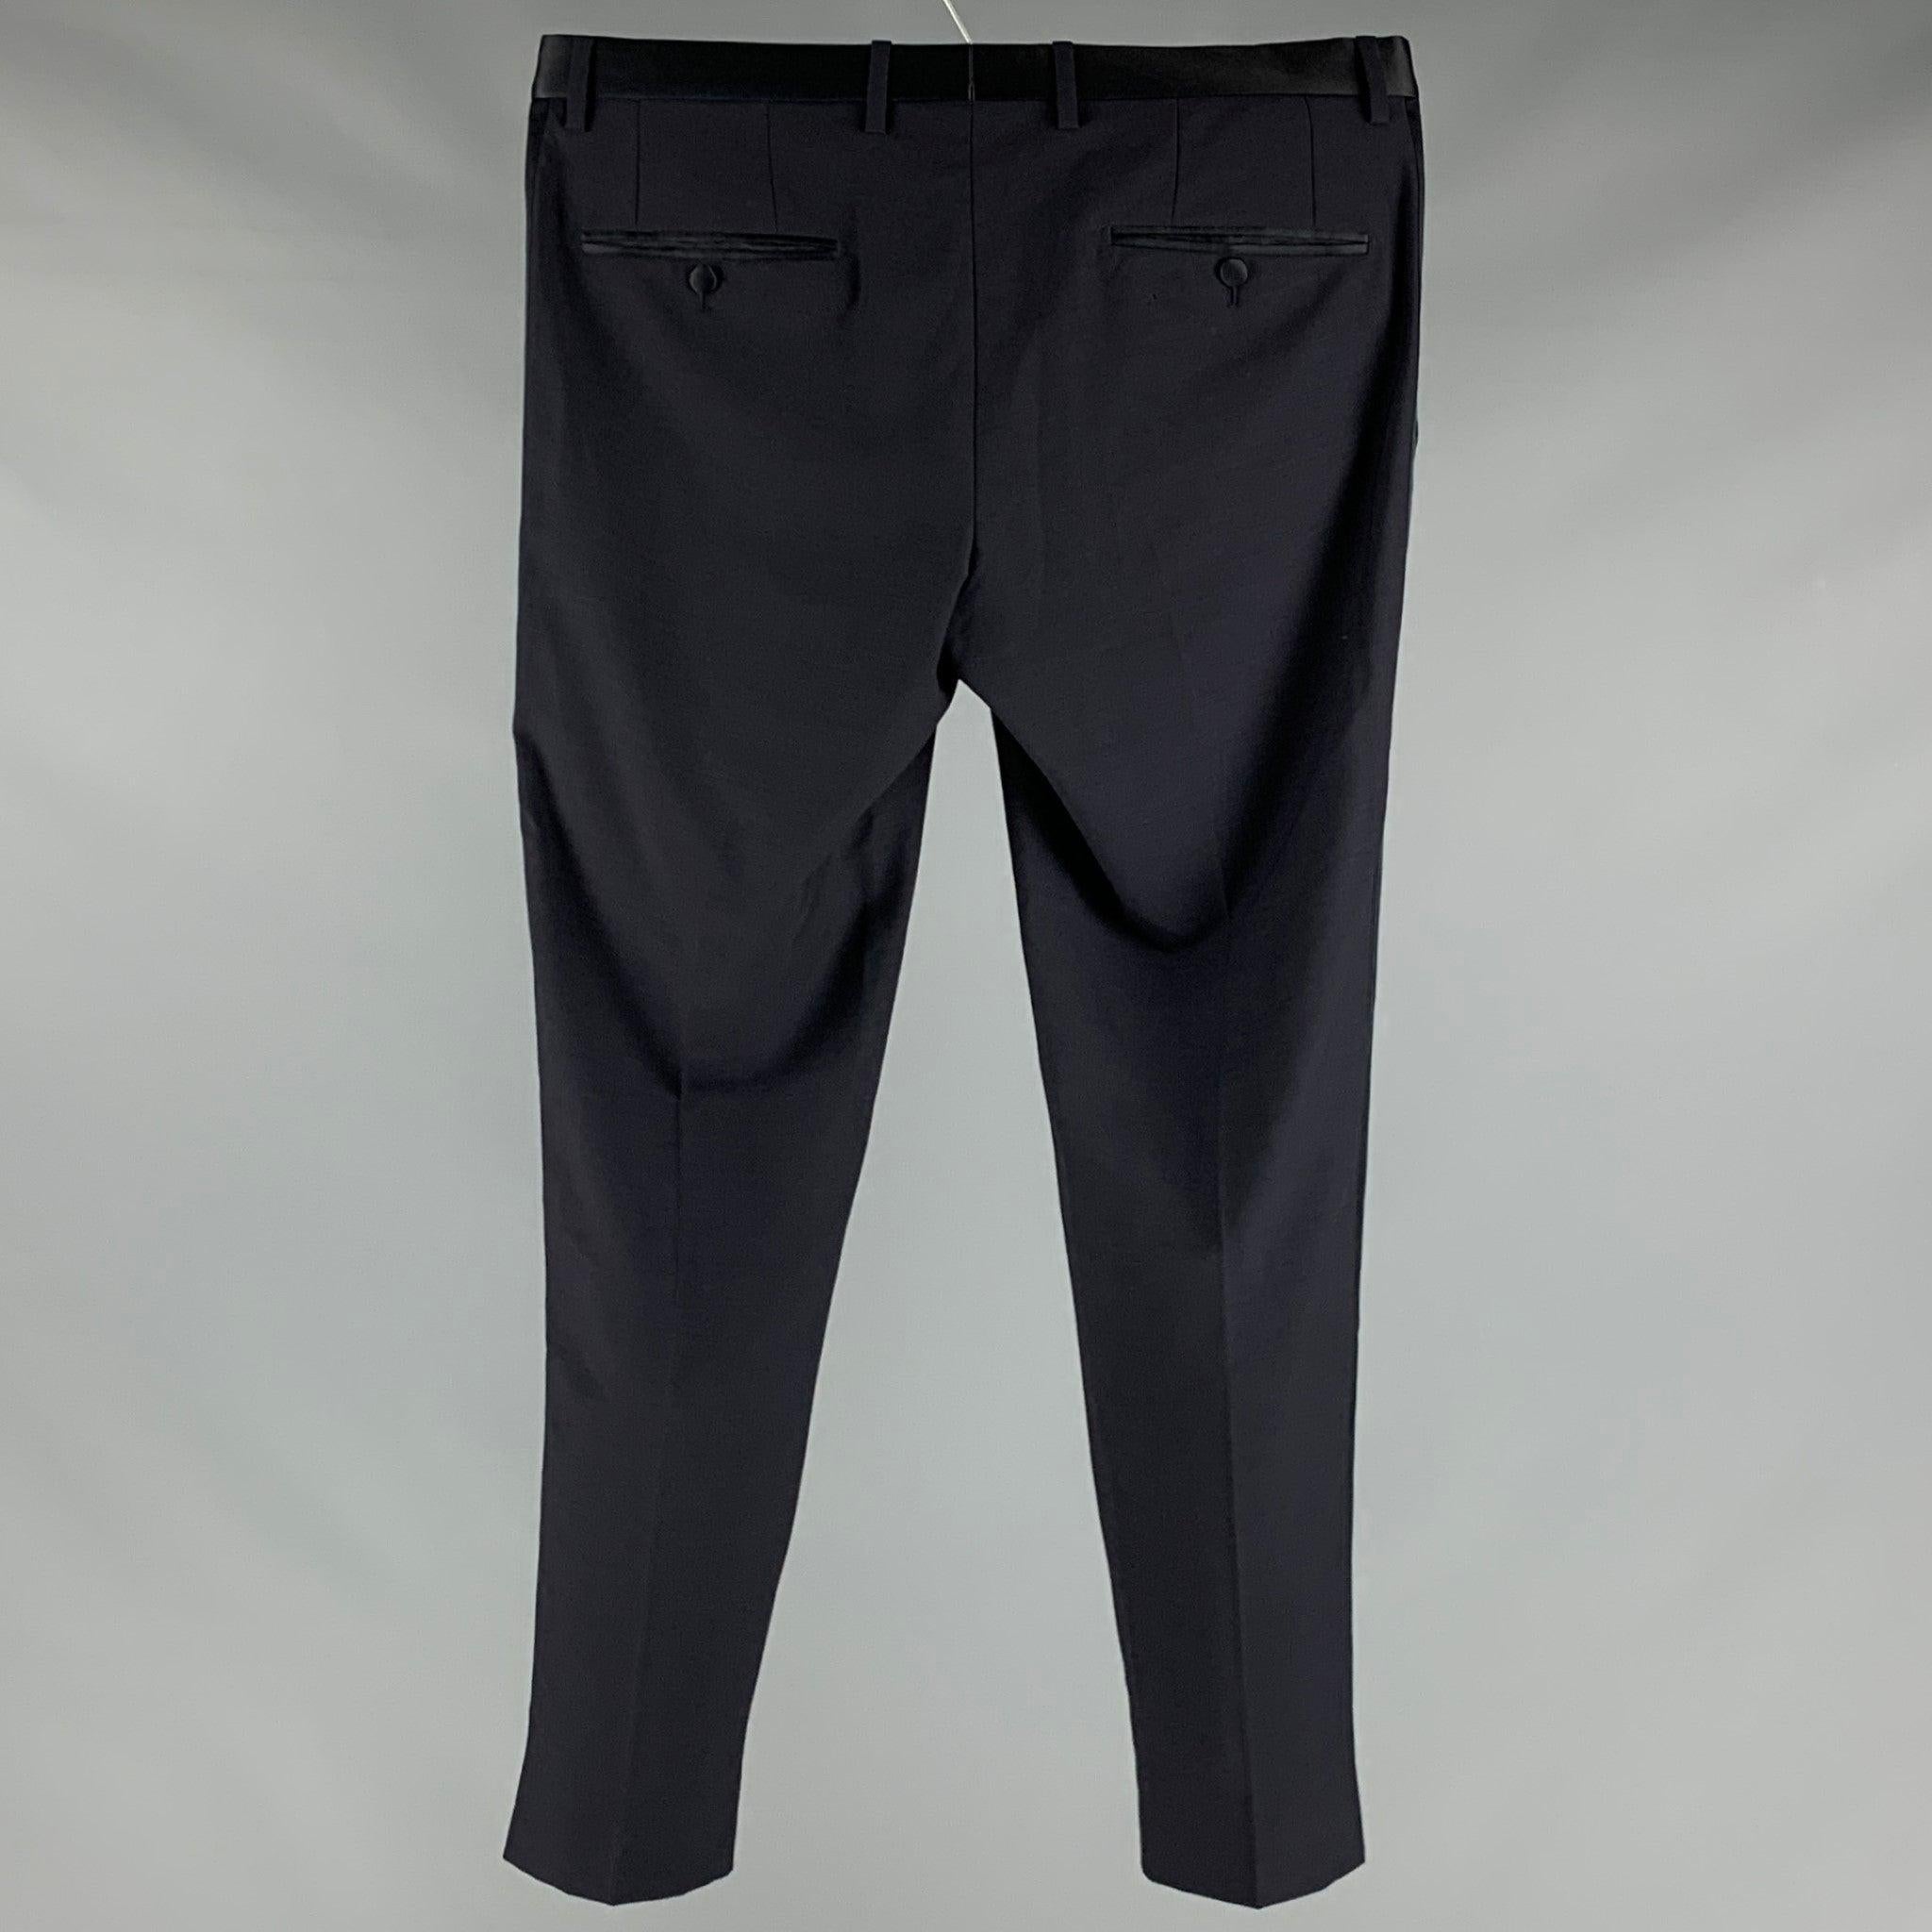 DOLCE & GABBANA tuxedo dress
pants in a navy wool fabric featuring satin waistband and stripes, flat front style, and zip fly closure. Made in Italy.Very Good Pre-Owned Condition. Minor signs of wear. 

Marked:  IT 50 

Measurements: 
 Waist: 34